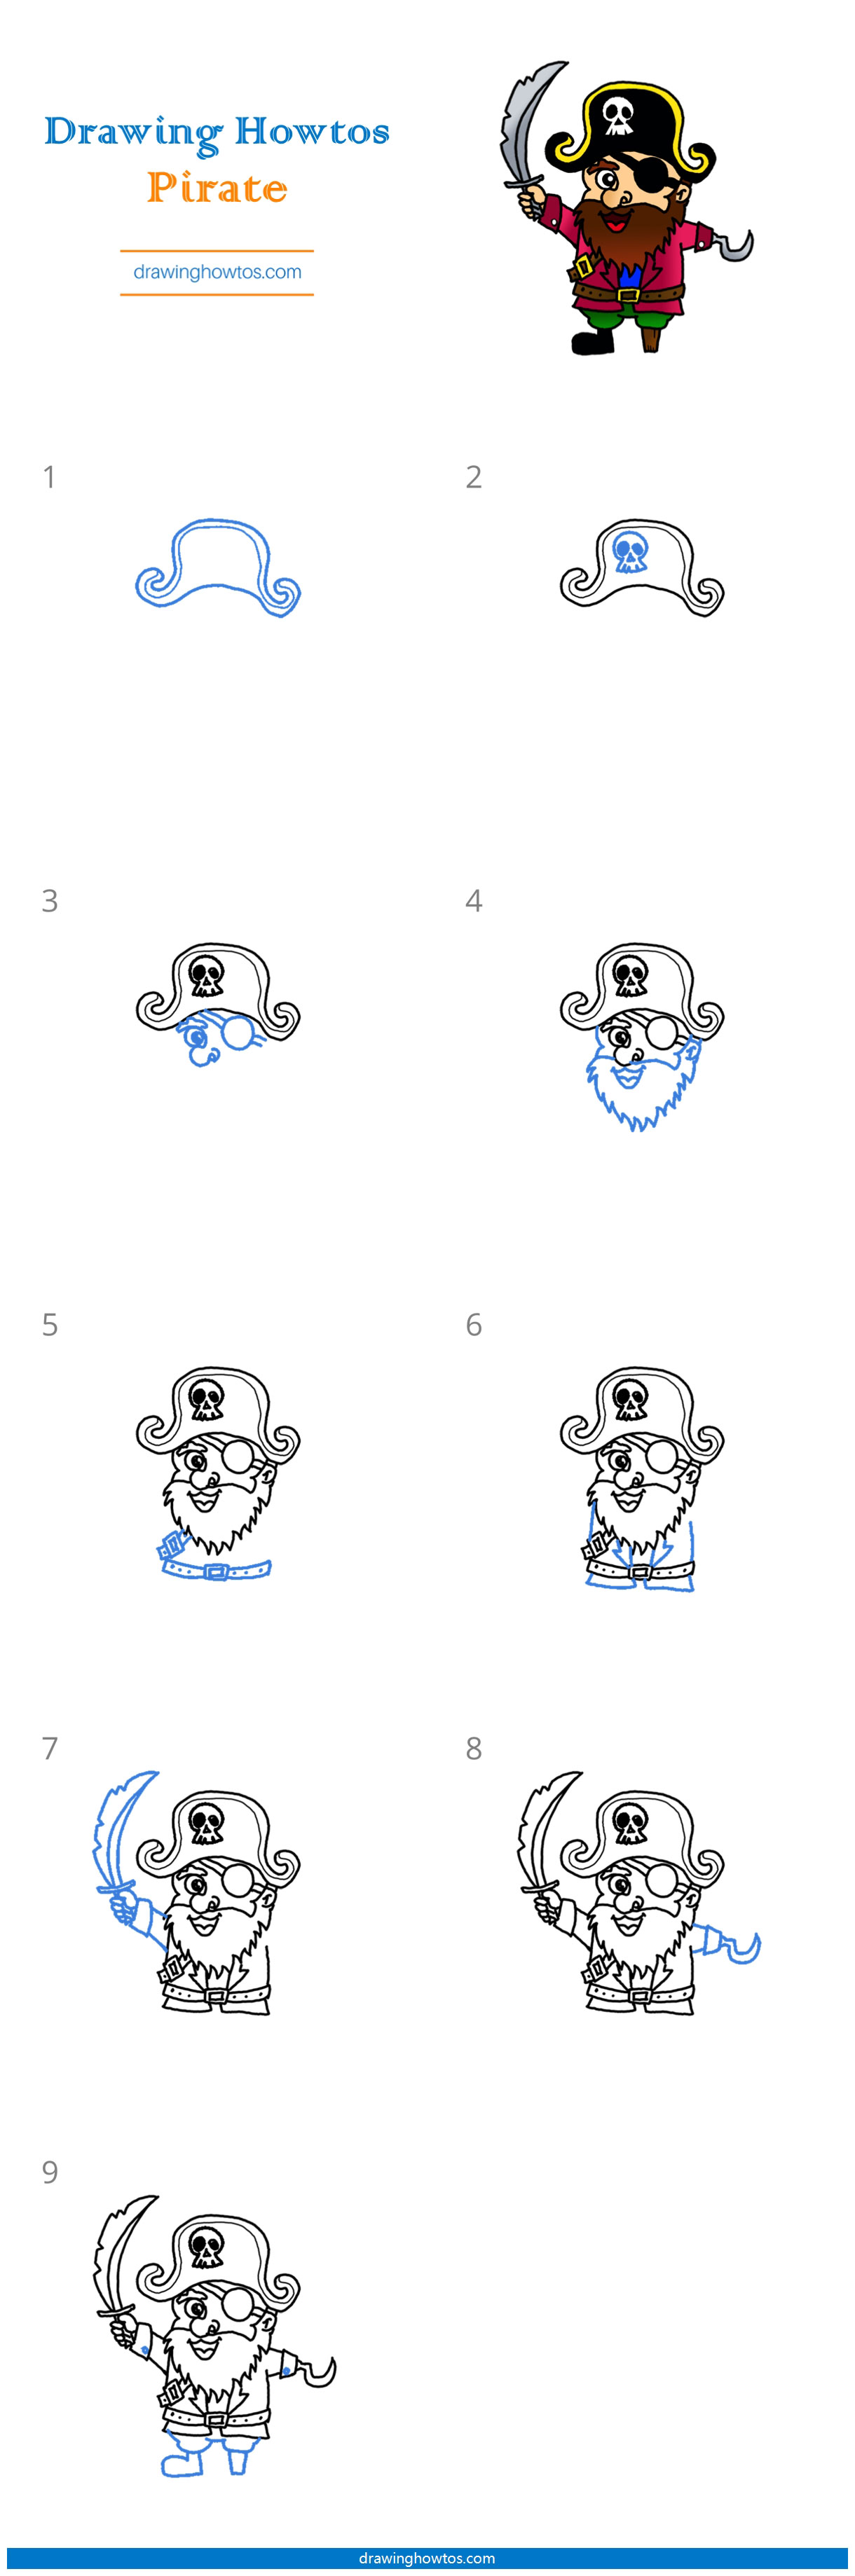 How to Draw a Pirate Step by Step